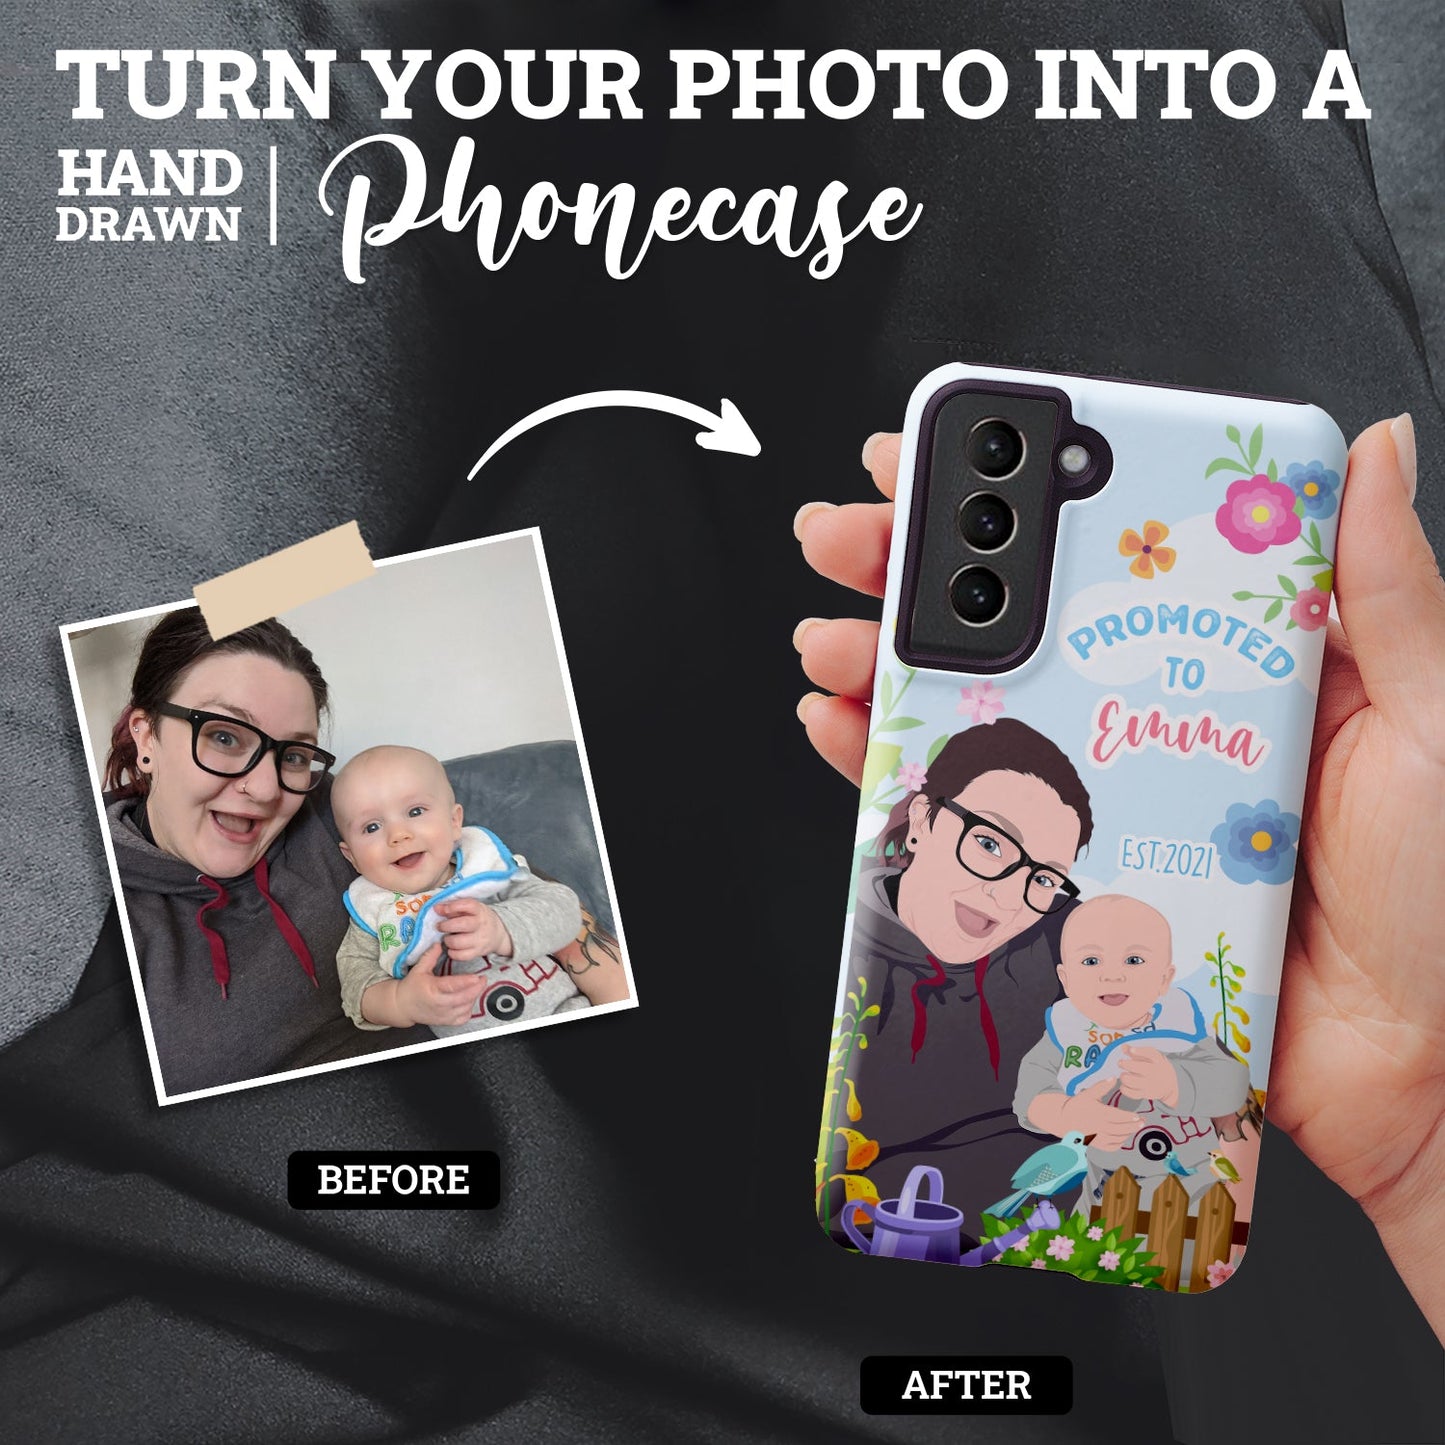 Promoted to Nana Phone Case Personalized